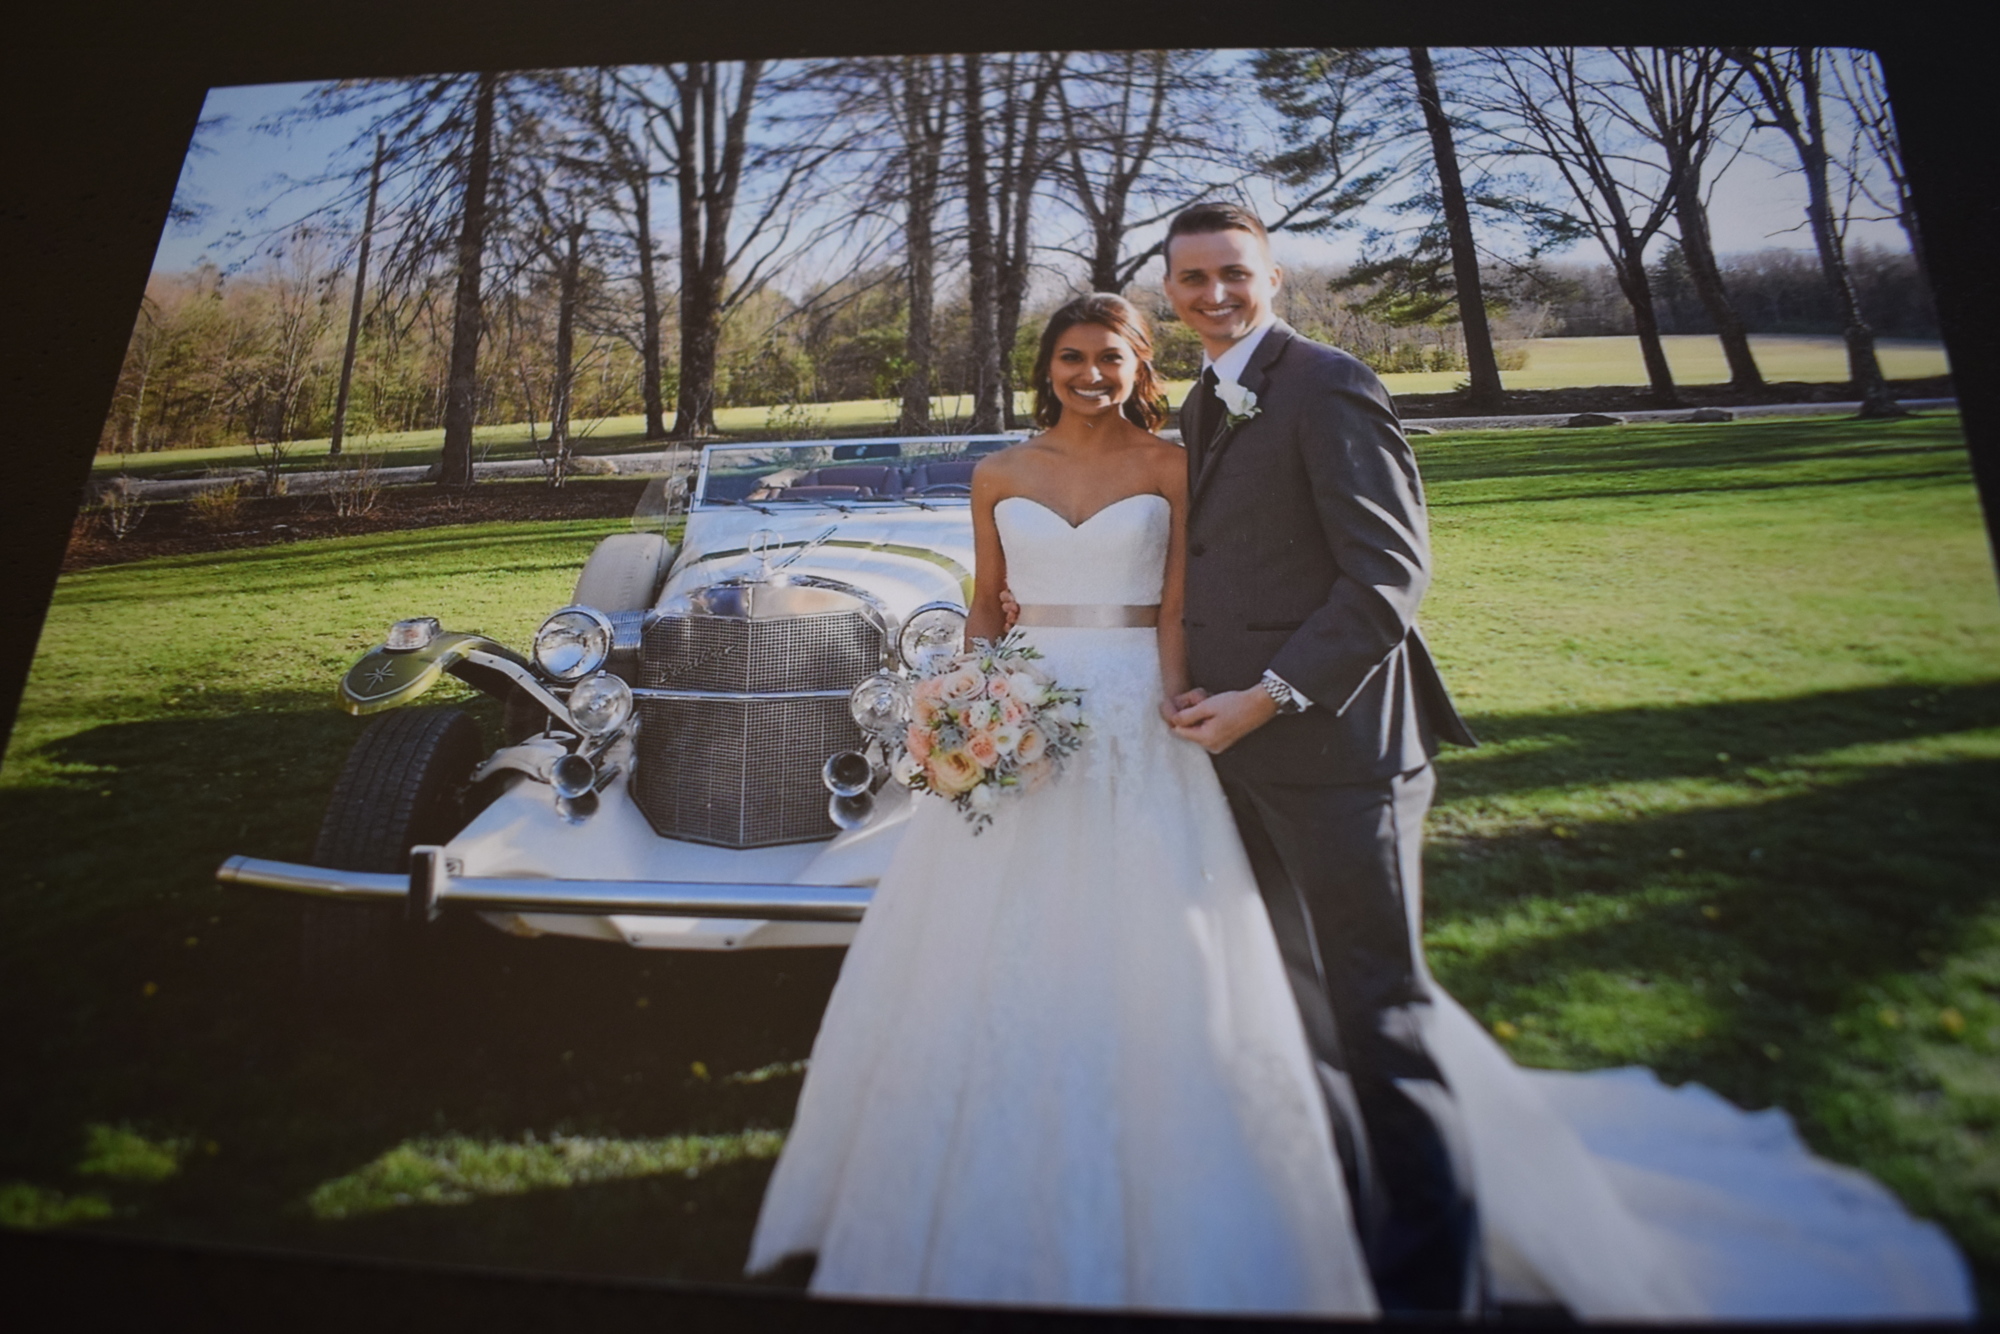 Tamara and Patrick Donovan used the car for their wedding in Reading, Pennsylvania in 2016. It was used many times over the years for special occasions.